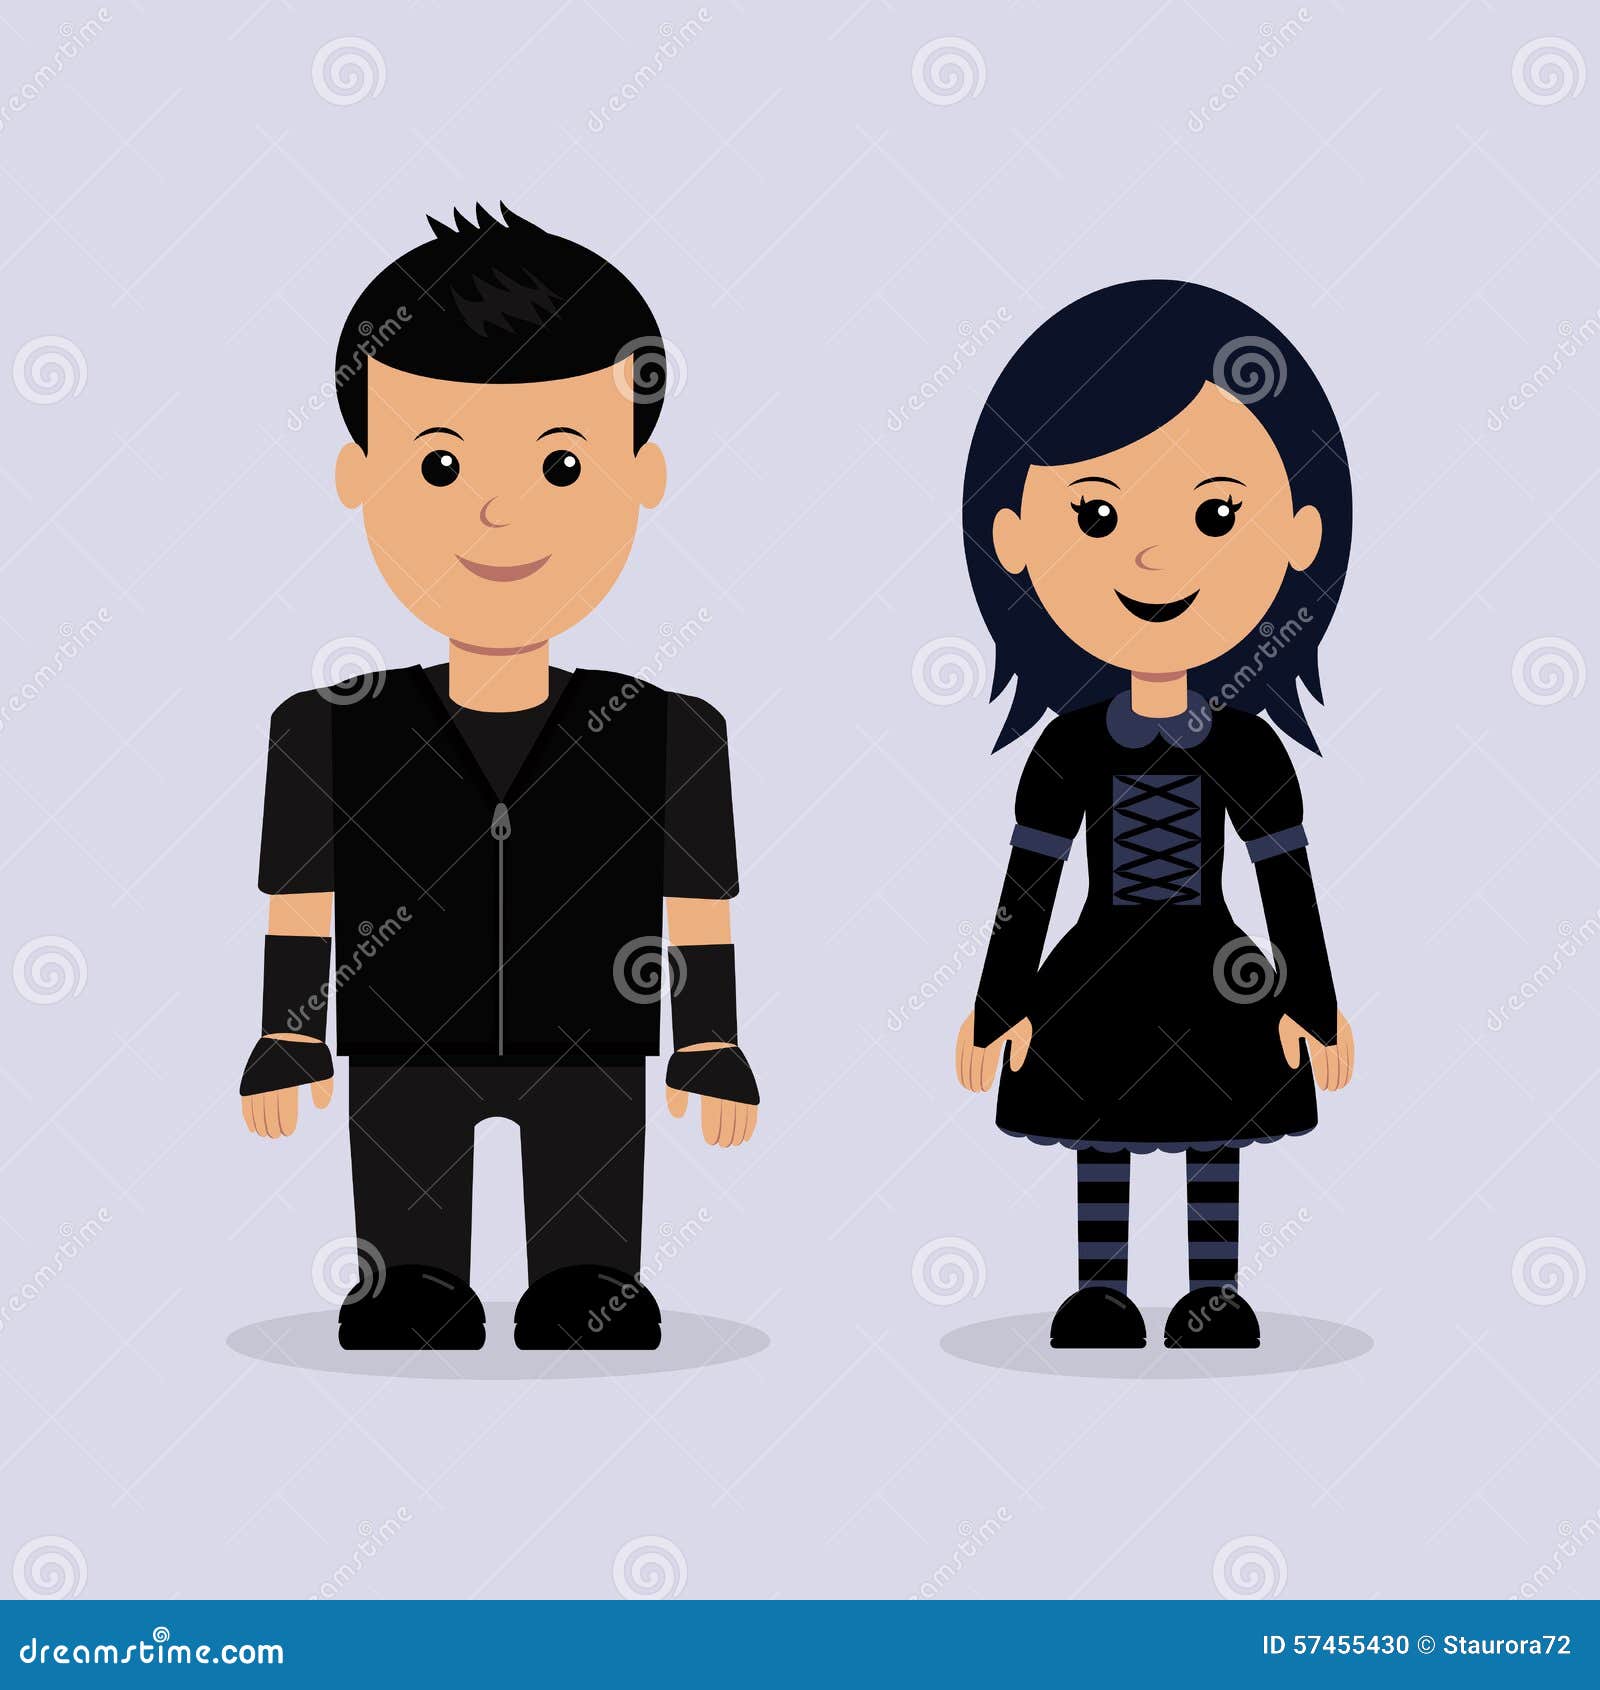 modern boy and girl related to the goths subculture